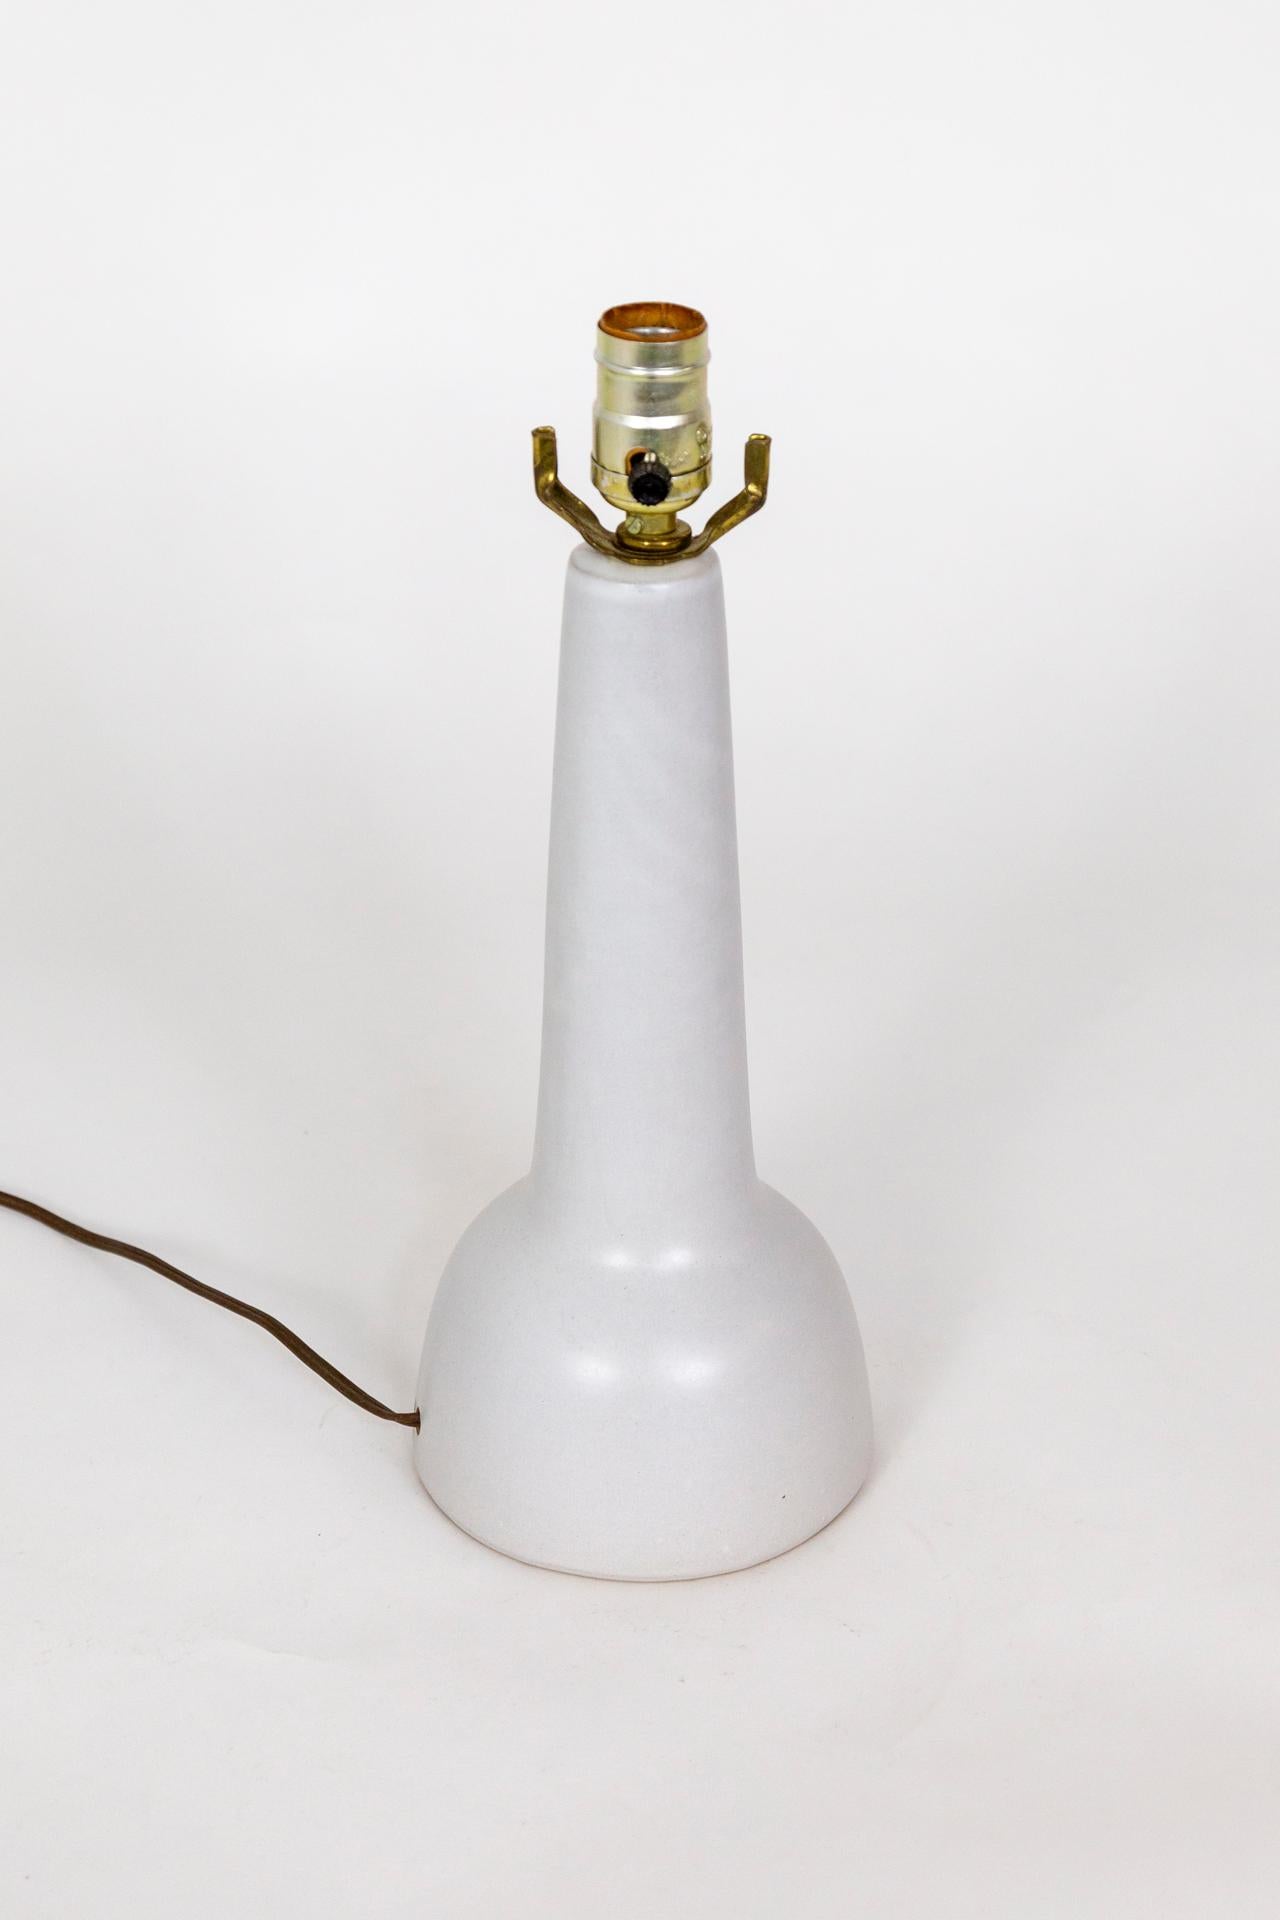 A streamlined, ivory-white, ceramic lamp made by Marshall Studios and designed by Jane and Gordon Martz, circa the 1960s. Signed on the back; 